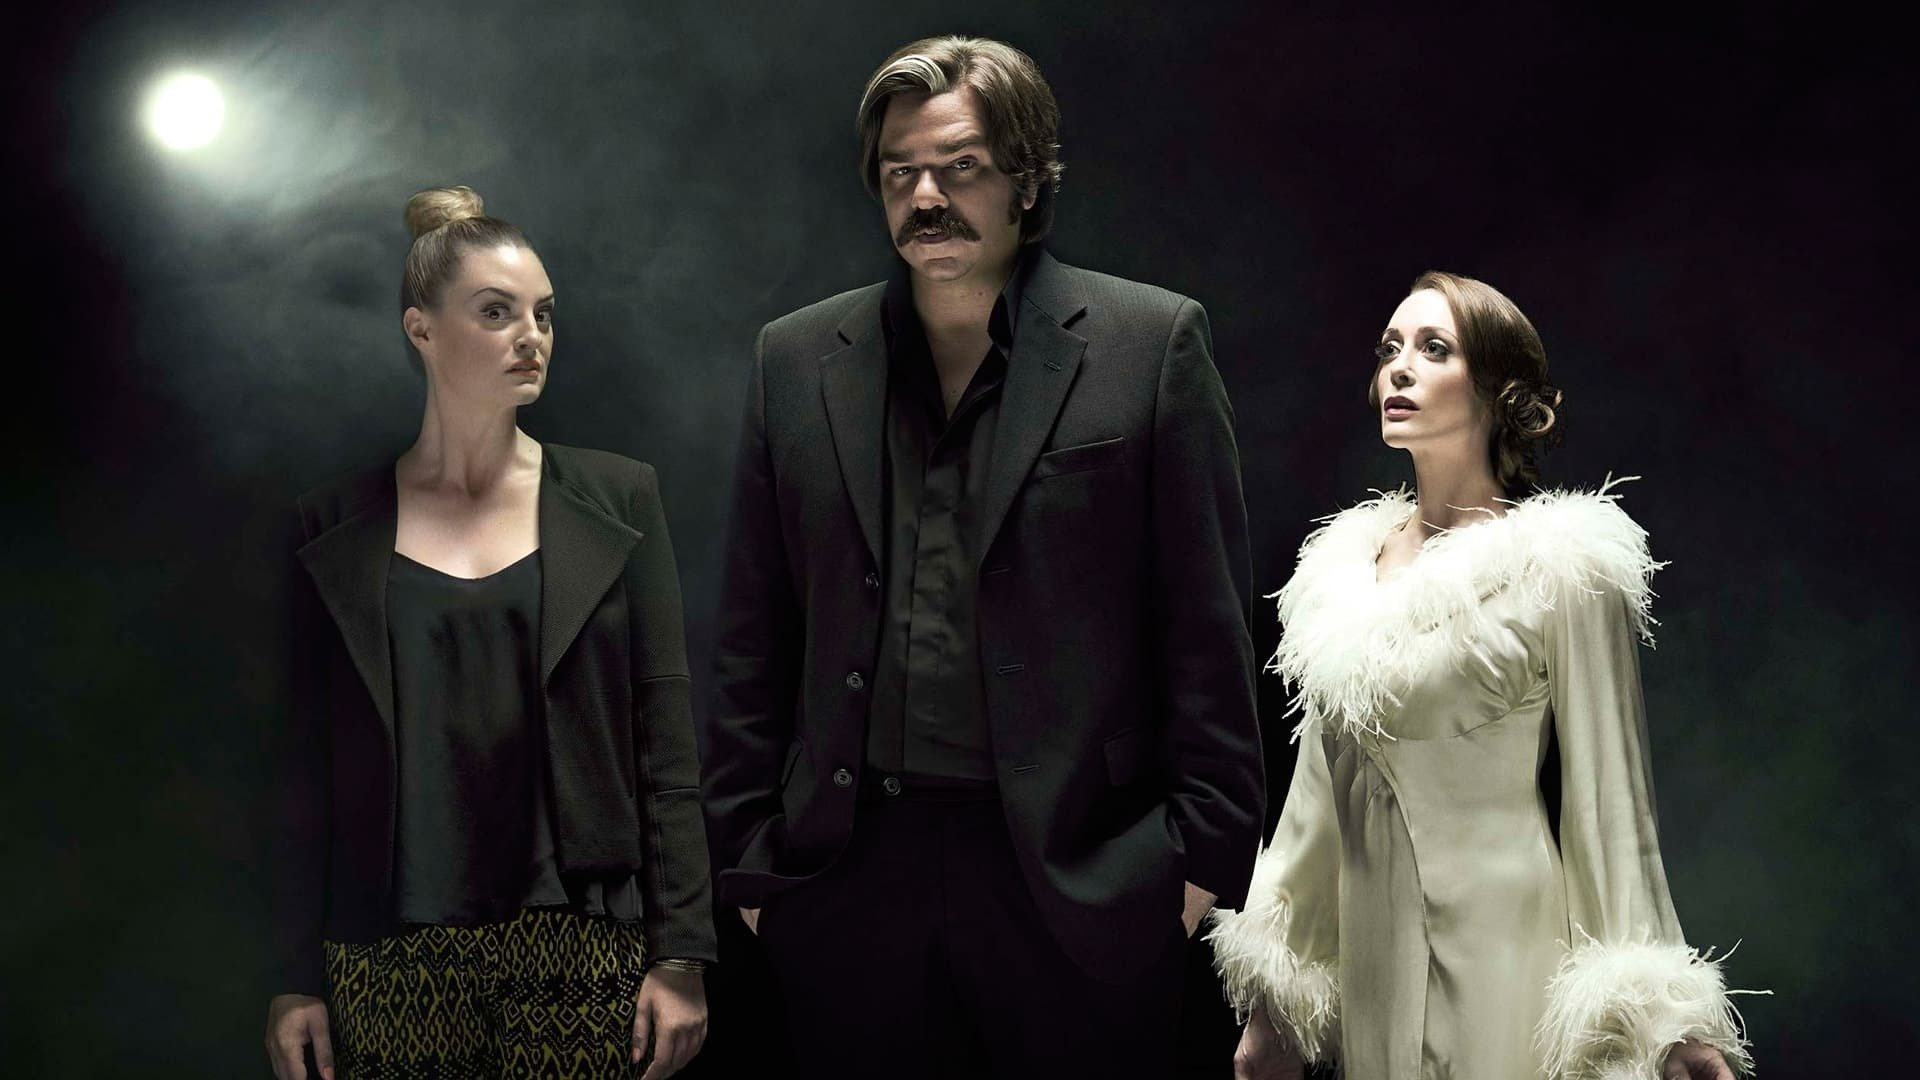 Show Toast of London